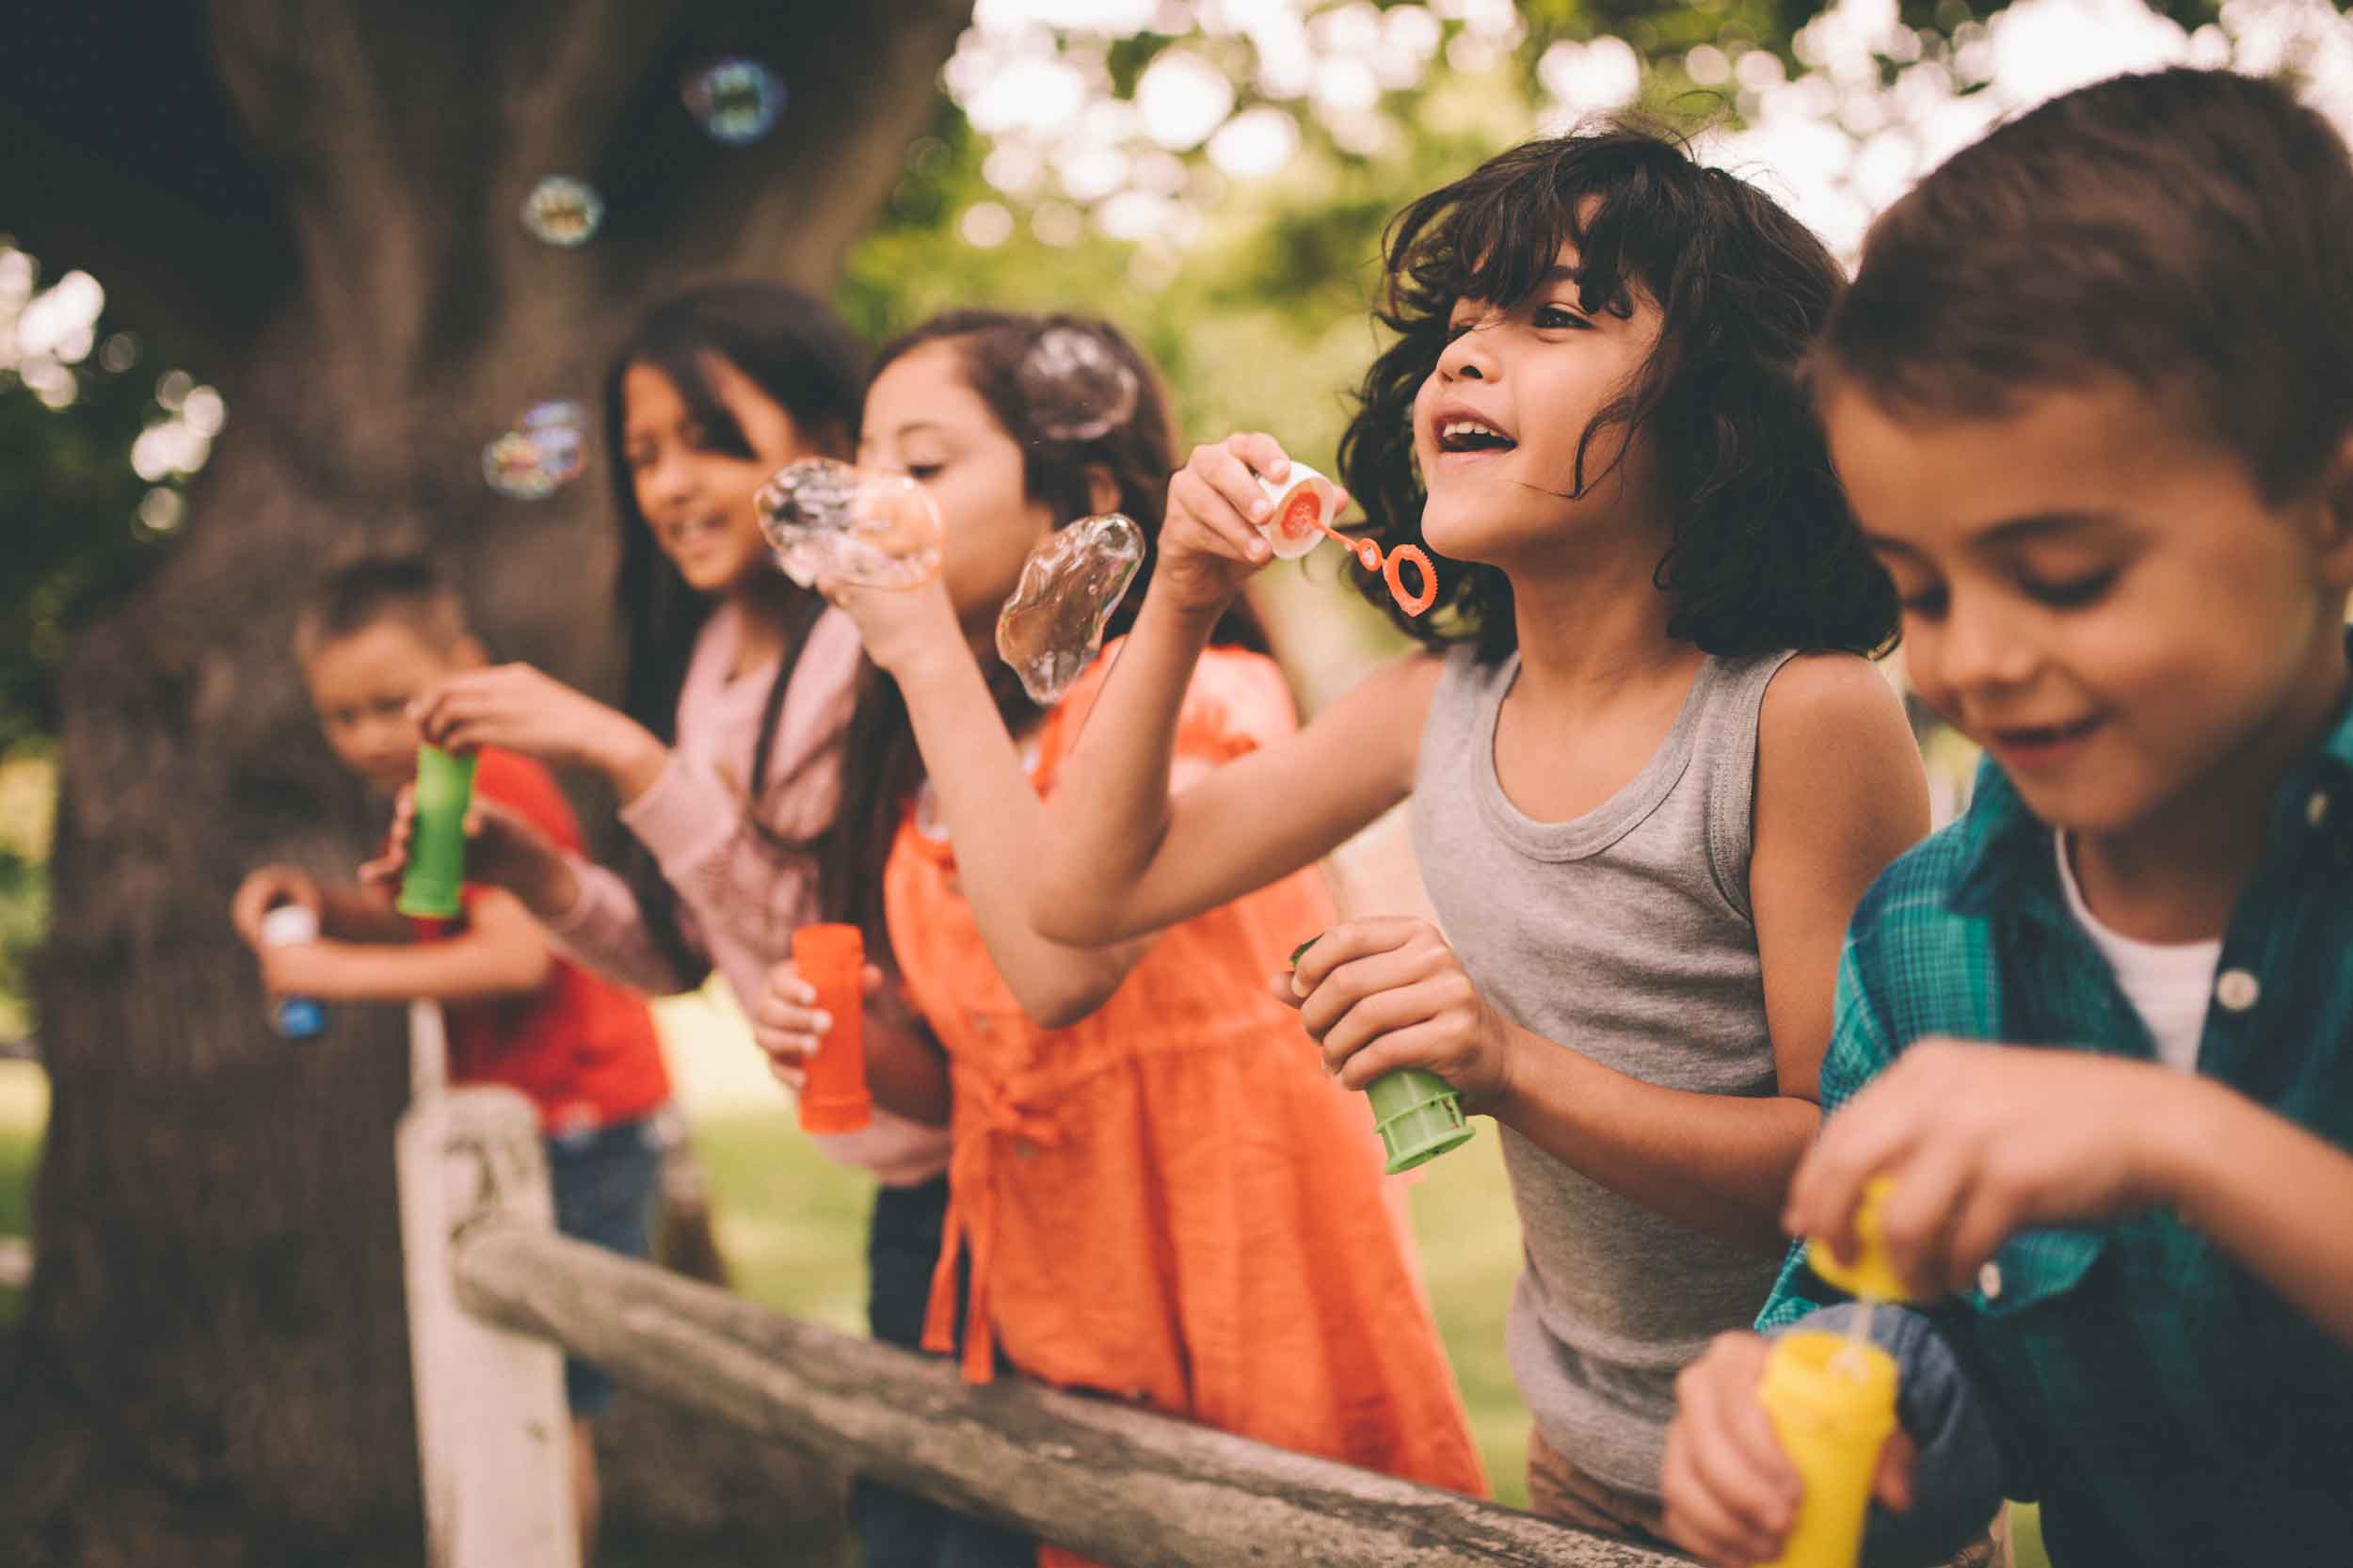 5 kids leaning up against a fence, blowing bubbles and smiling